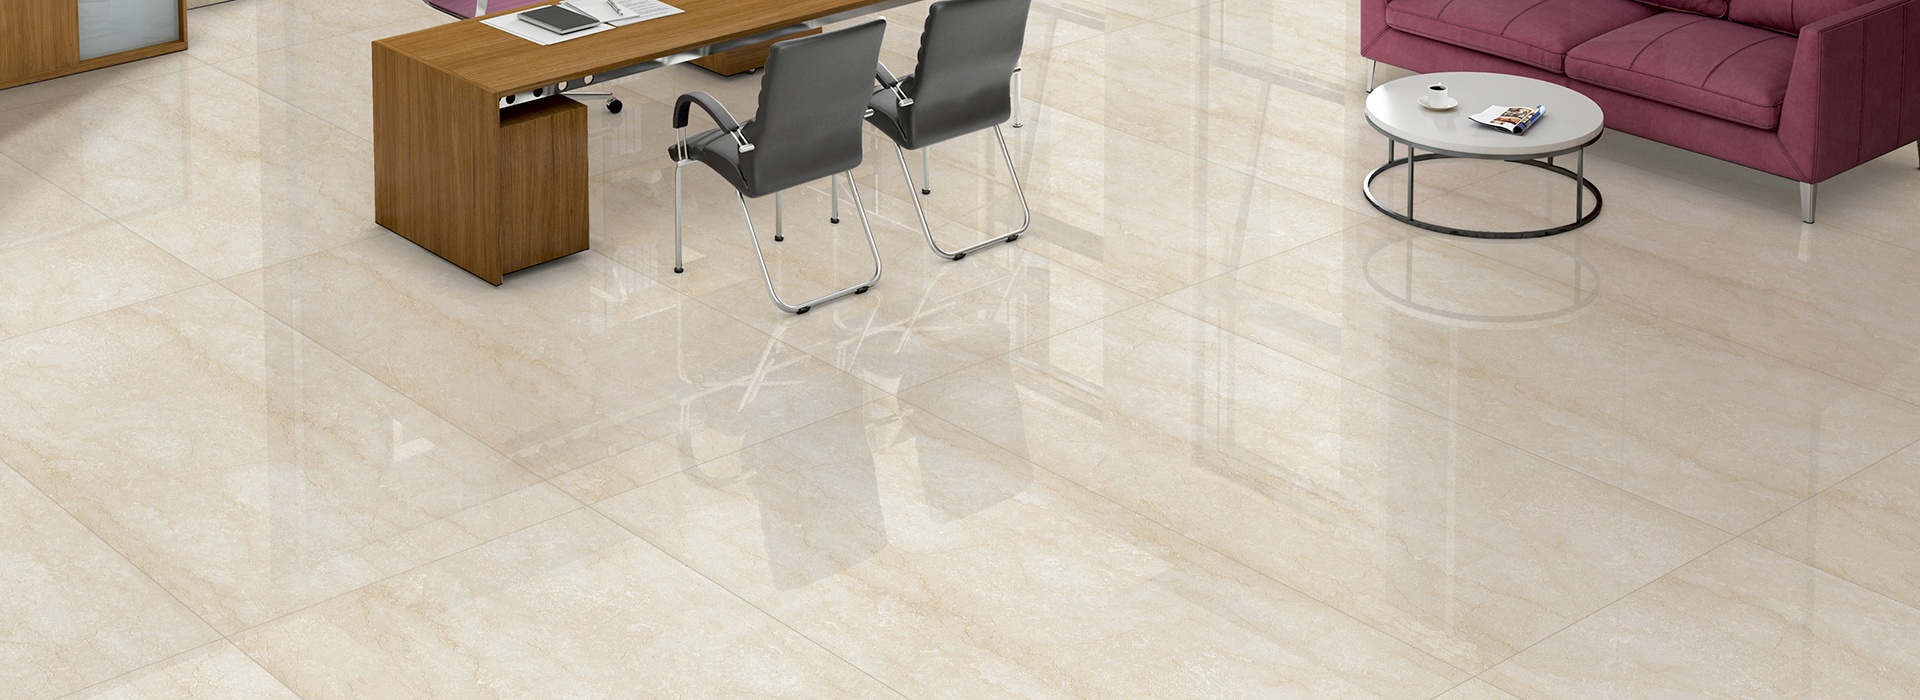 Italtile’s Luxurious New Marble-Look Tile Collection